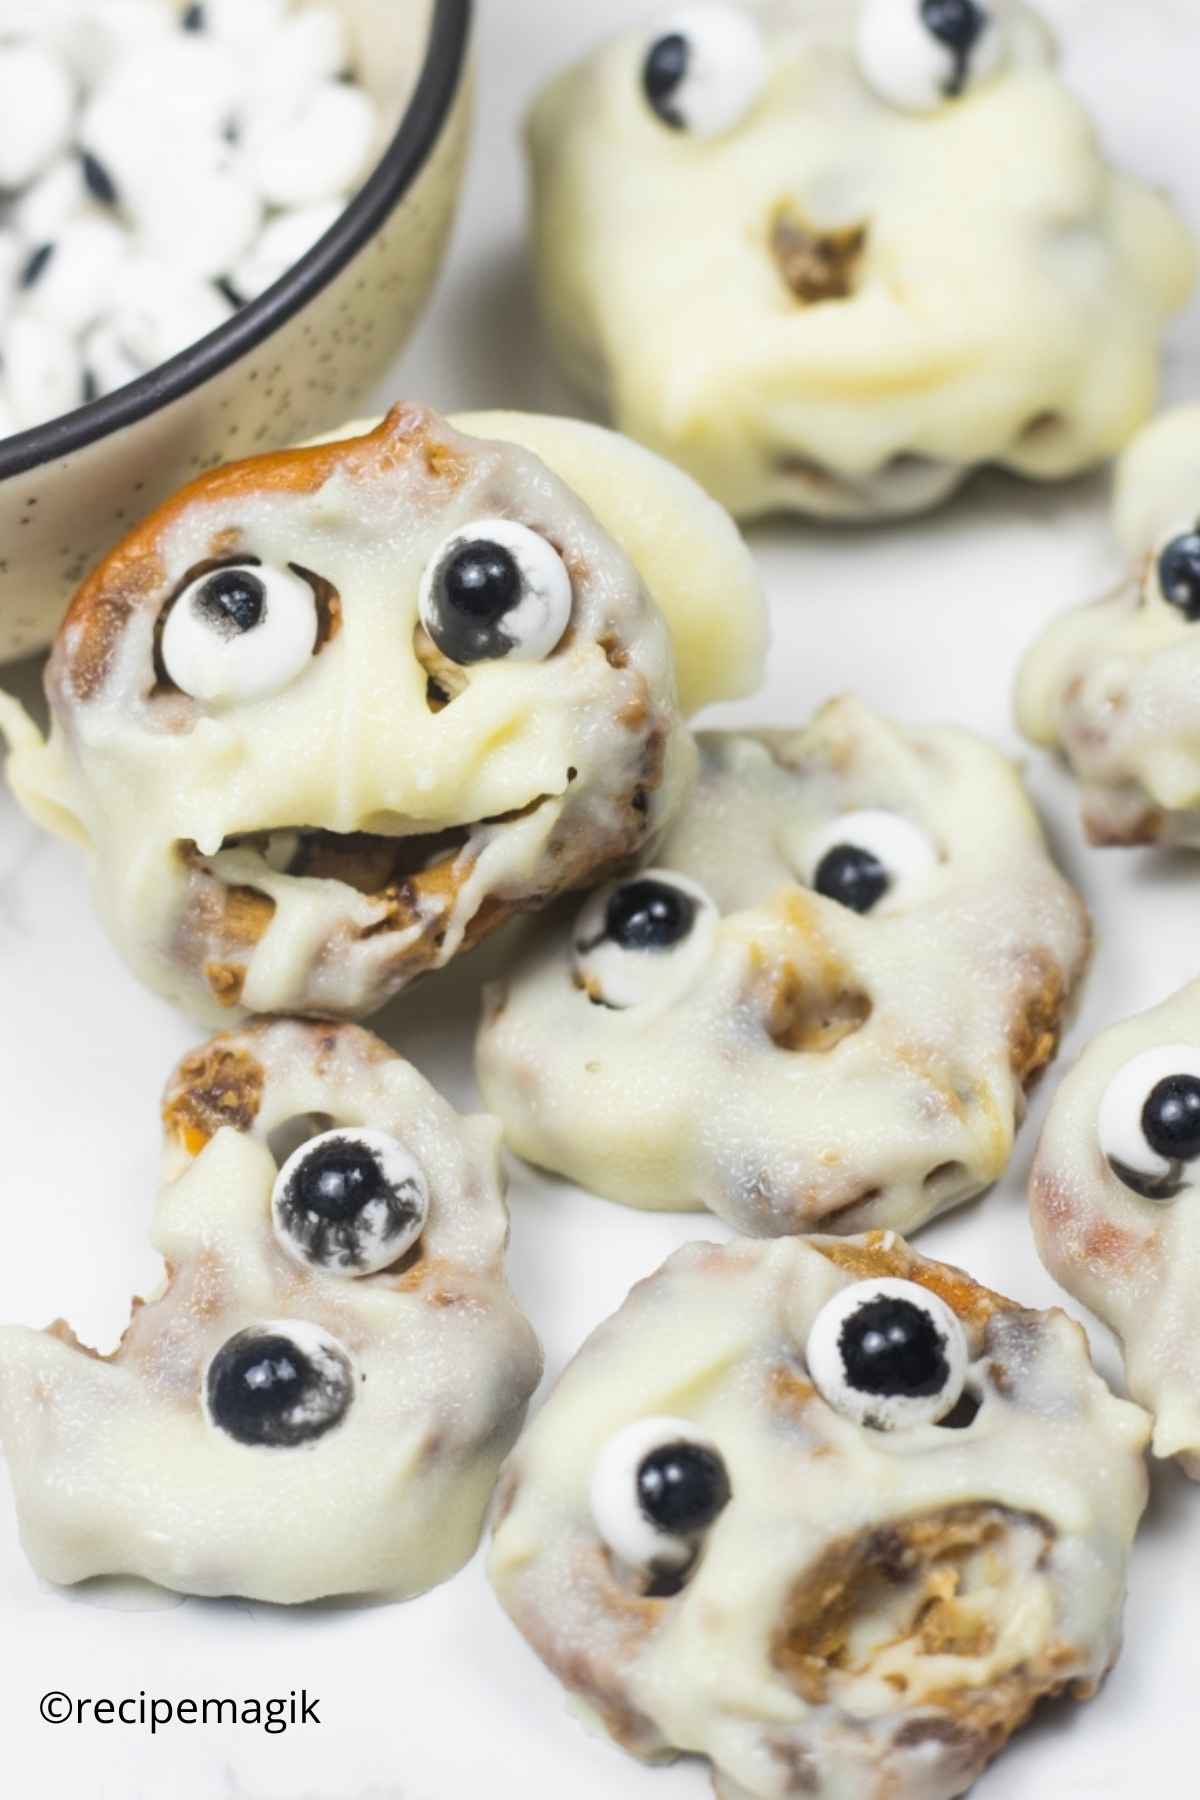 pretzel coated in white chocolate with candy eyeballs